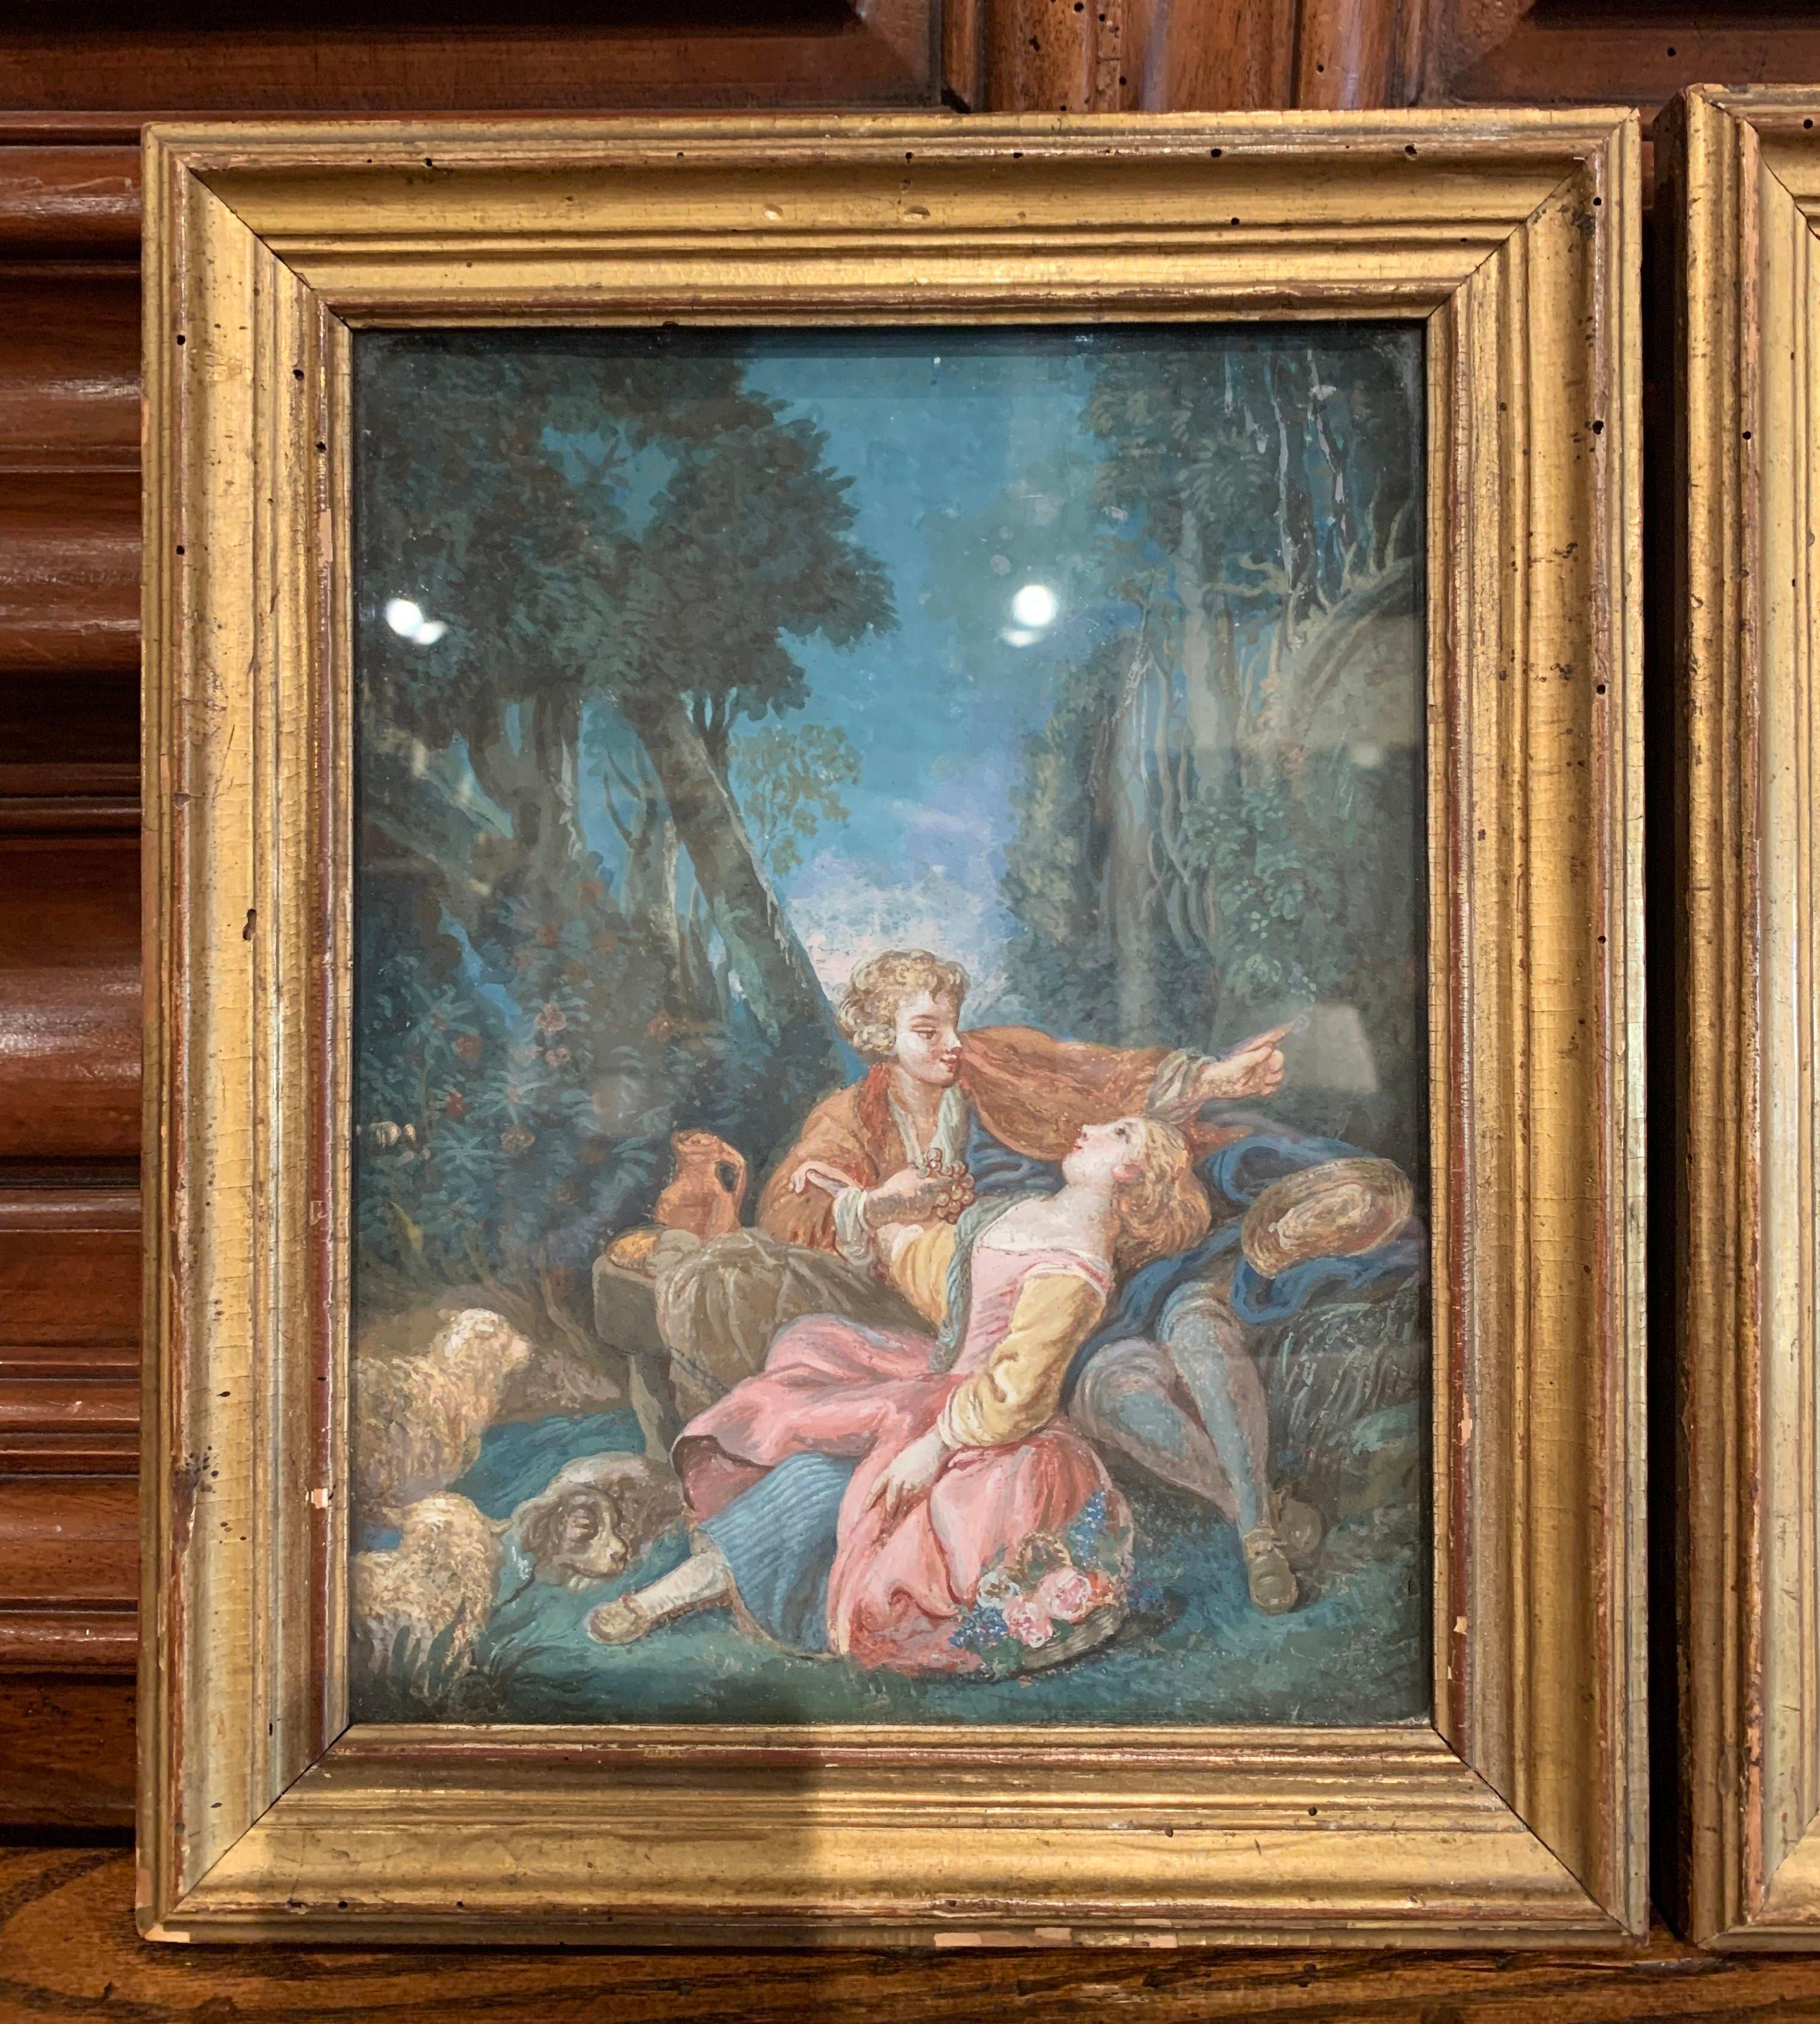 These antique colorful watercolors were crafted in France circa 1780, set in the original giltwood frames with glass protection, each art work depicts a courting scene with a young gentleman romancing a young beauty. Both pieces are set in a very